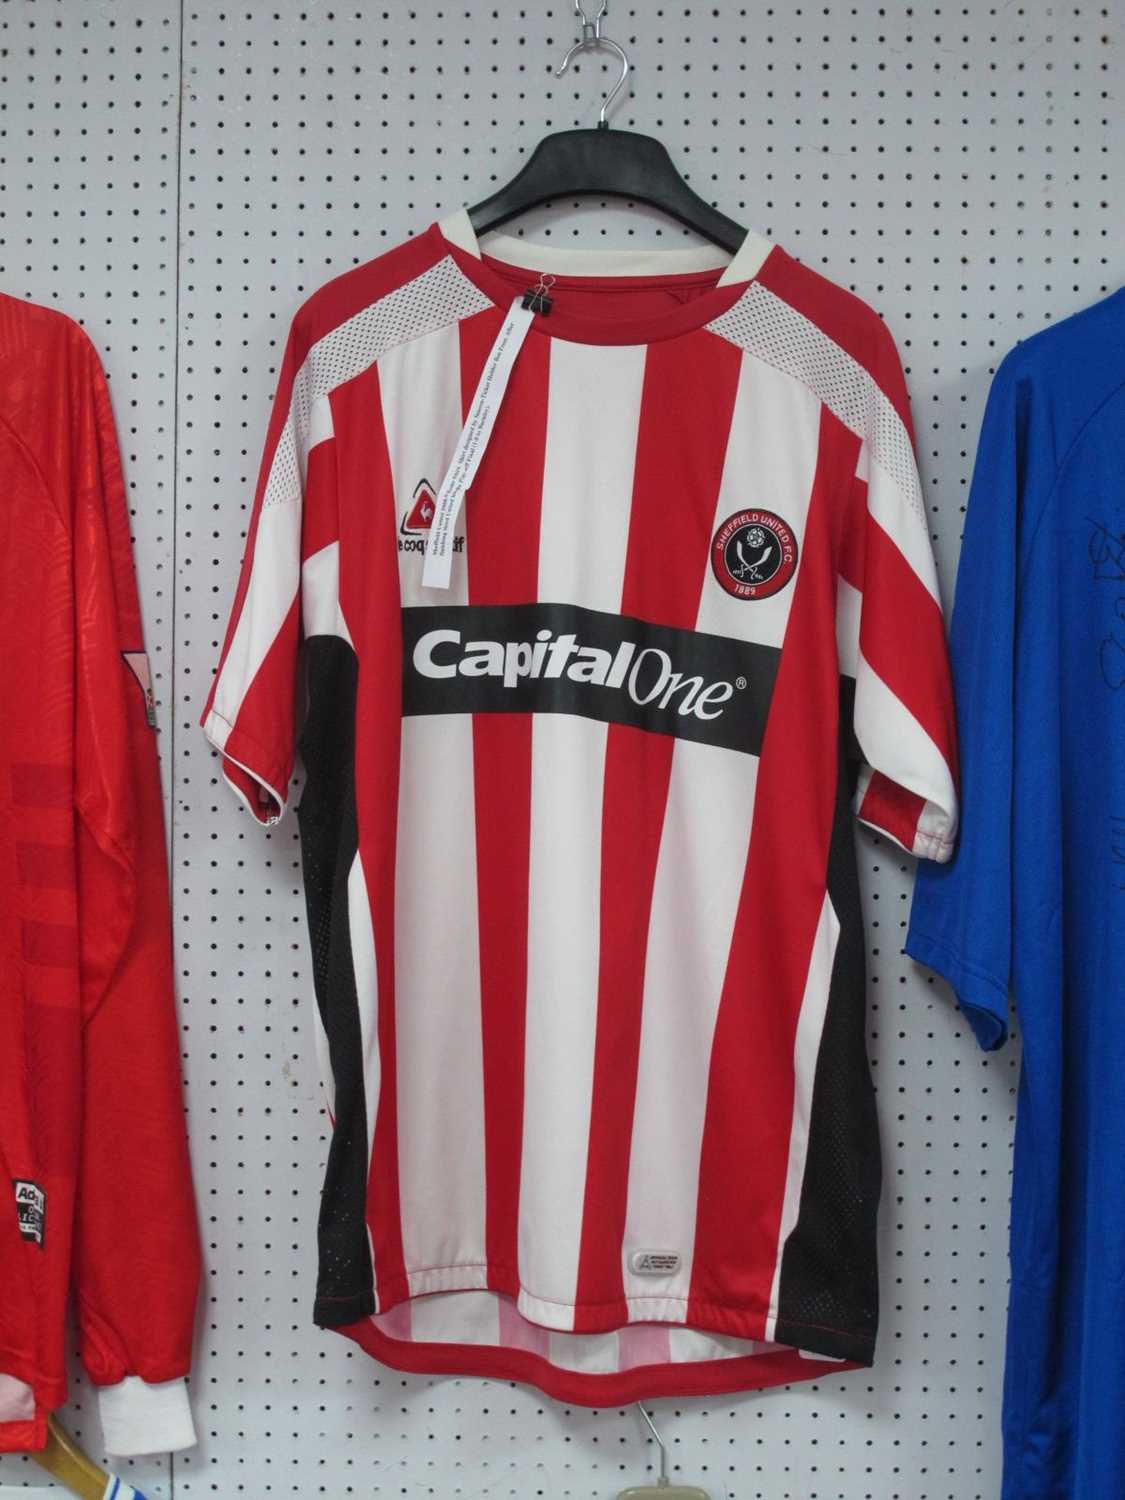 Sheffield United 2008-09 Le Coq Sportif Home Shirt with 'Capital One' Logo.